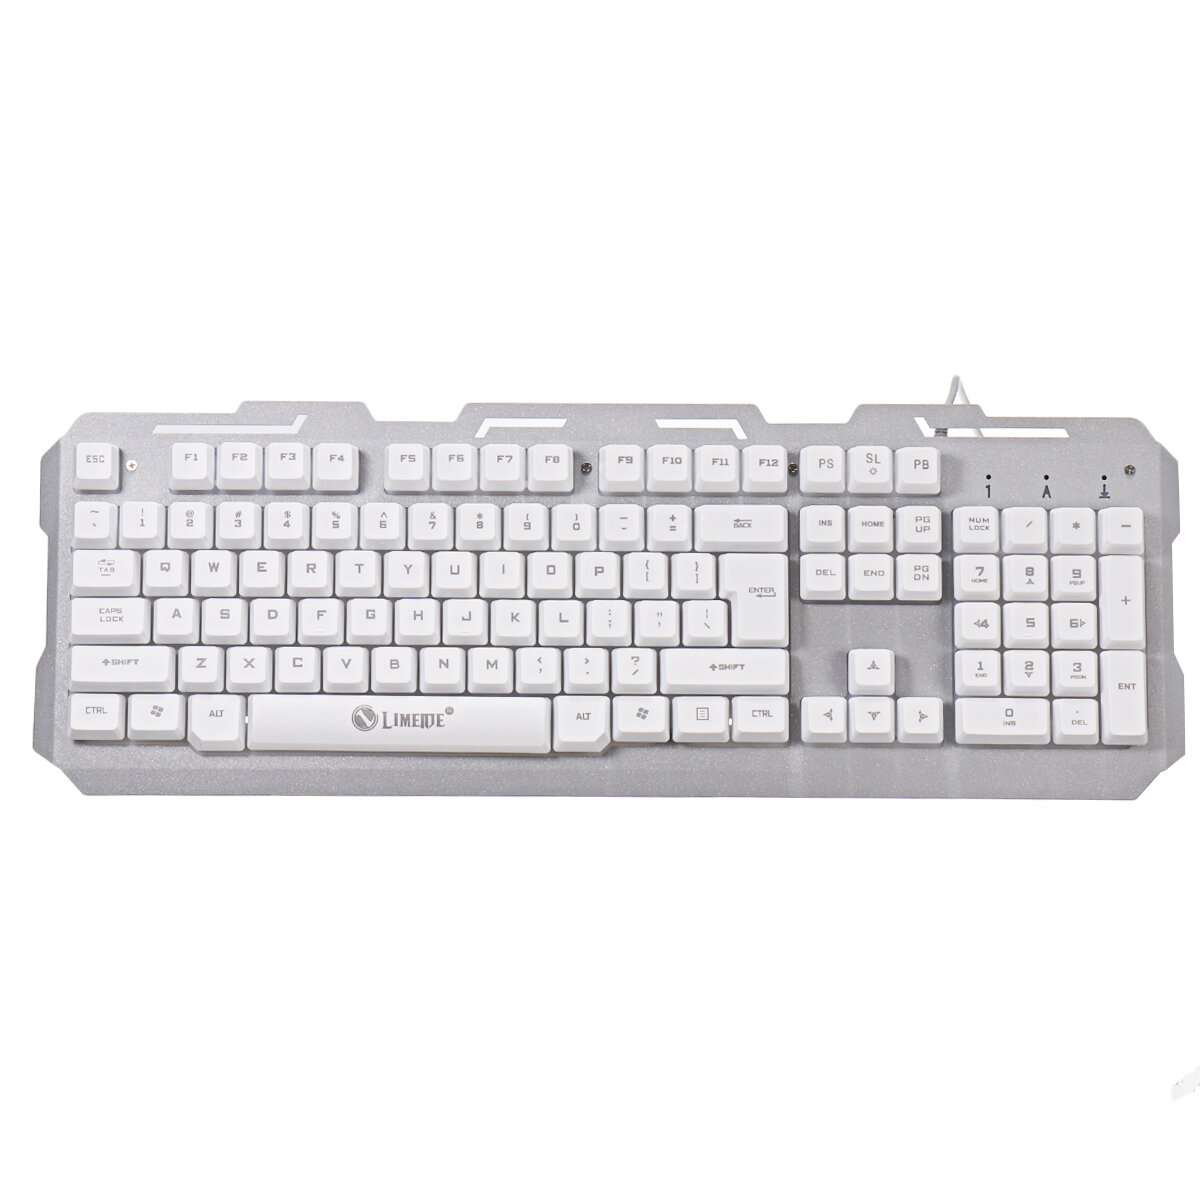 

104 Key USB Wired Gaming Keyboard and Mouse Set Waterproof LED Multi-Colored Changing Backlight Mouse For PS3/Xbox Compu